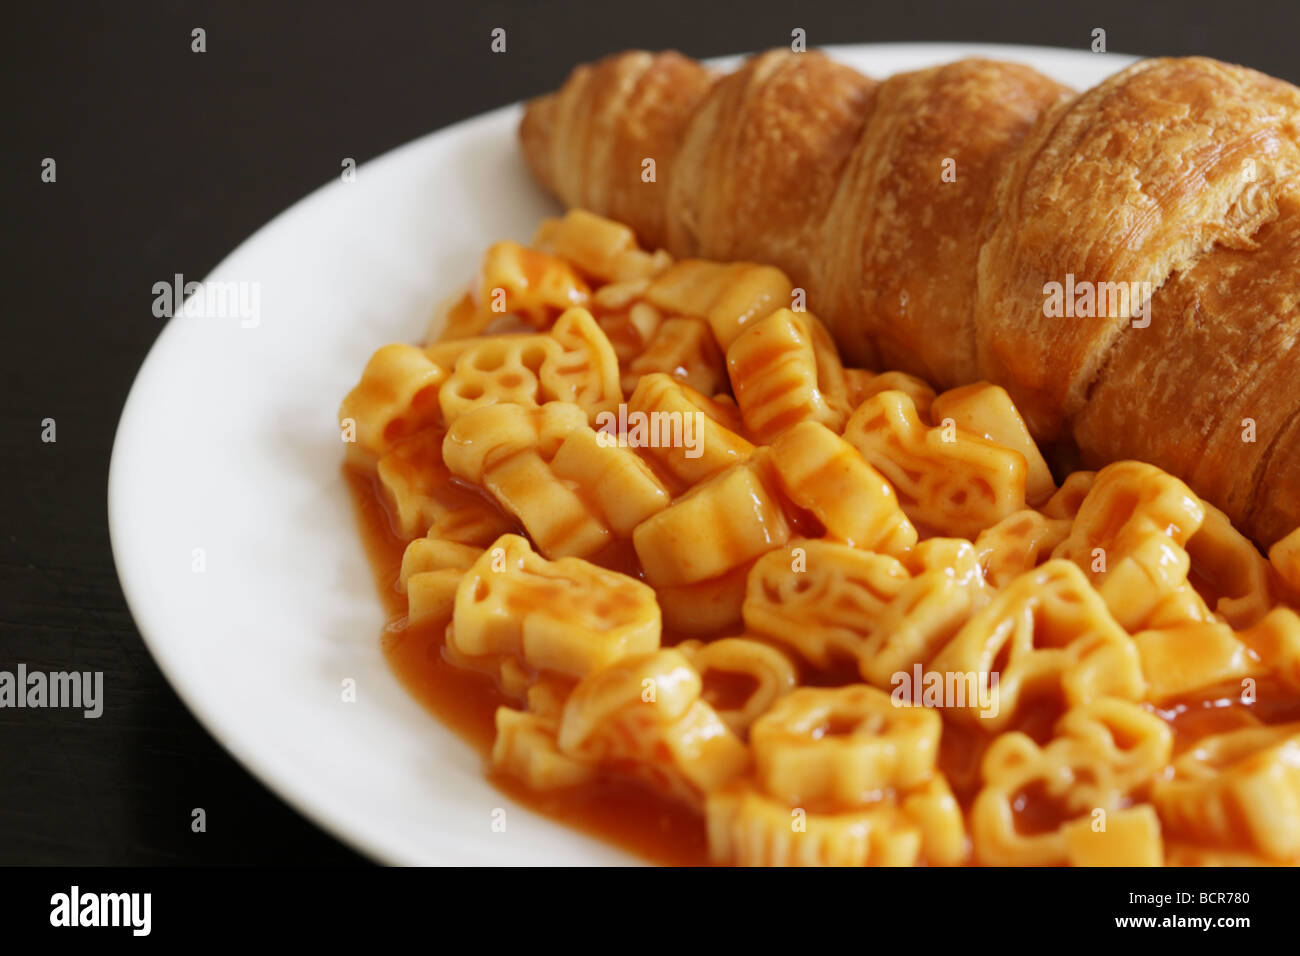 Croissant with Pasta Shapes Stock Photo